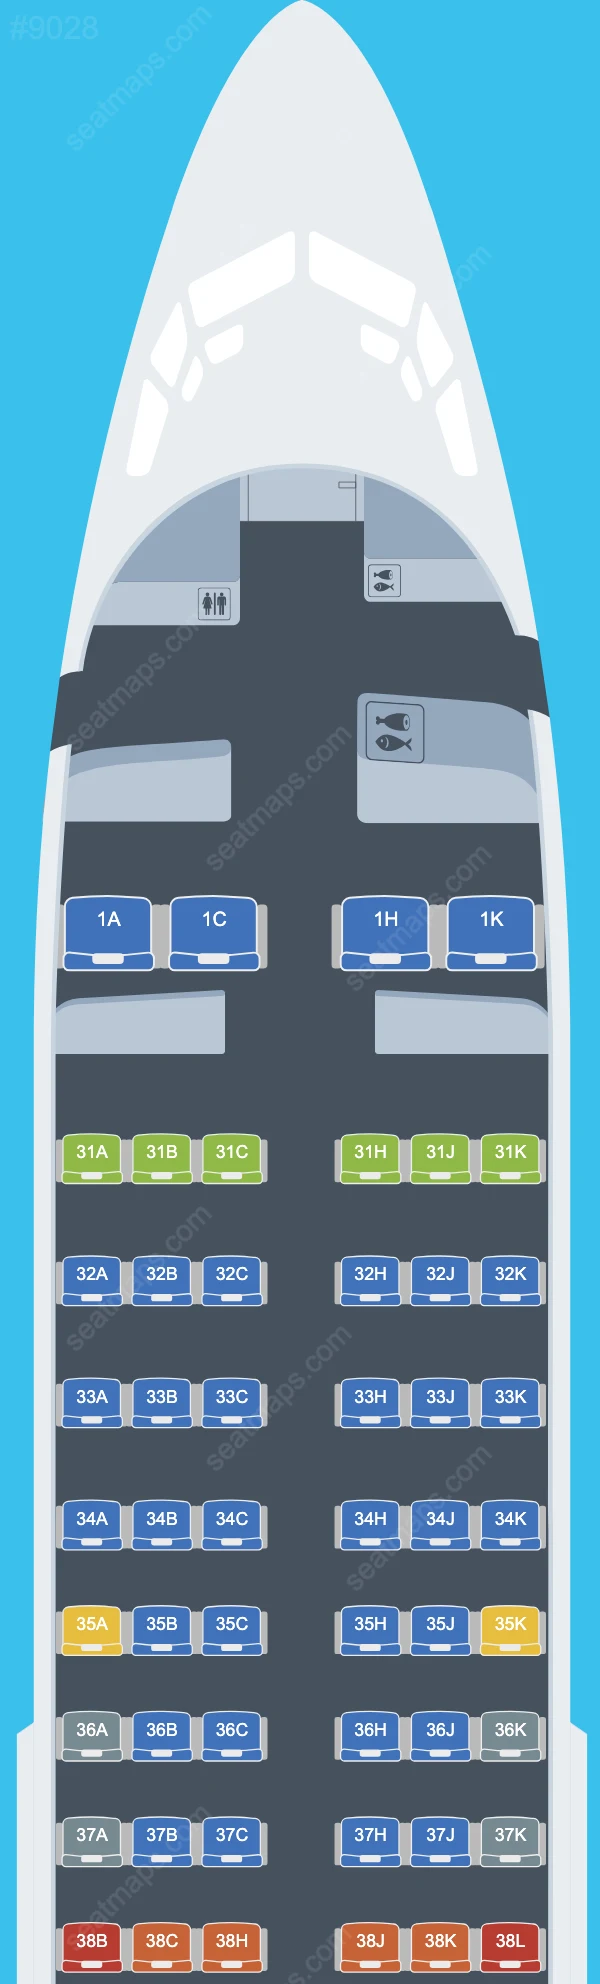 China Southern Boeing 737-700 V.3 seatmap mobile preview